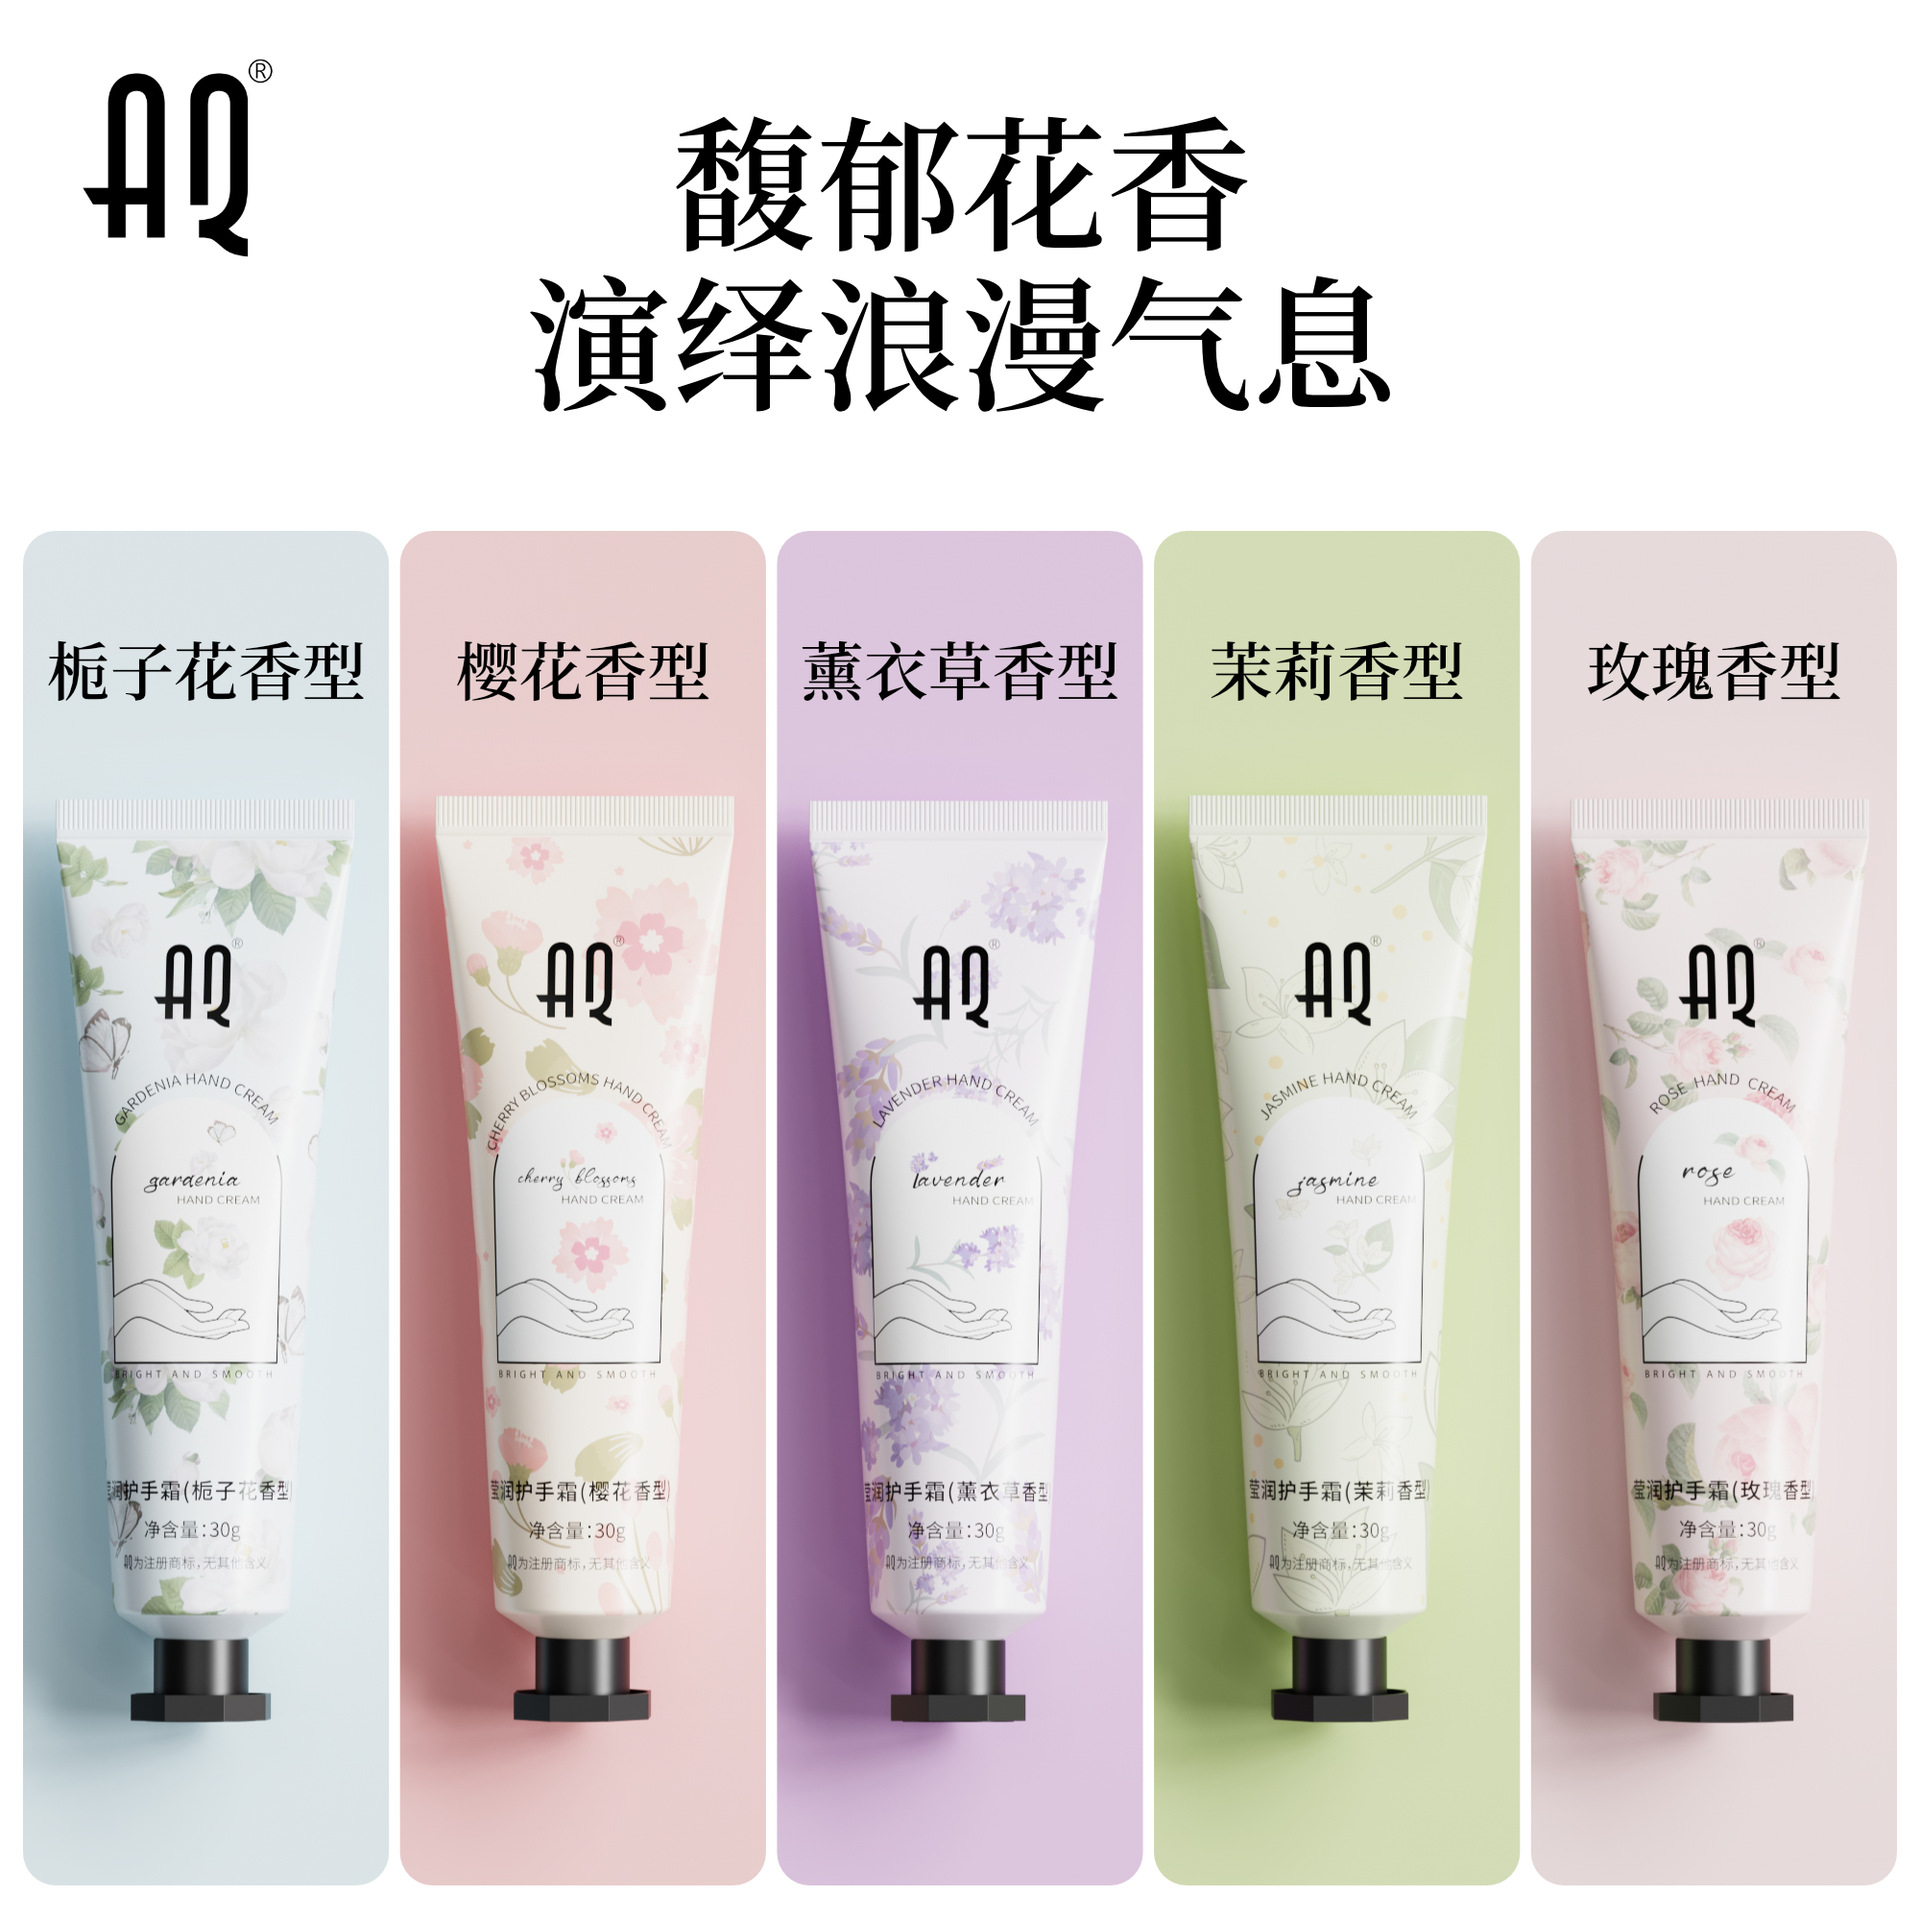 AQ hand protection Frosty flower fruit rose Jasmine lavender moisturize skin autumn and winter anti-dry crack manufacturers wholesale